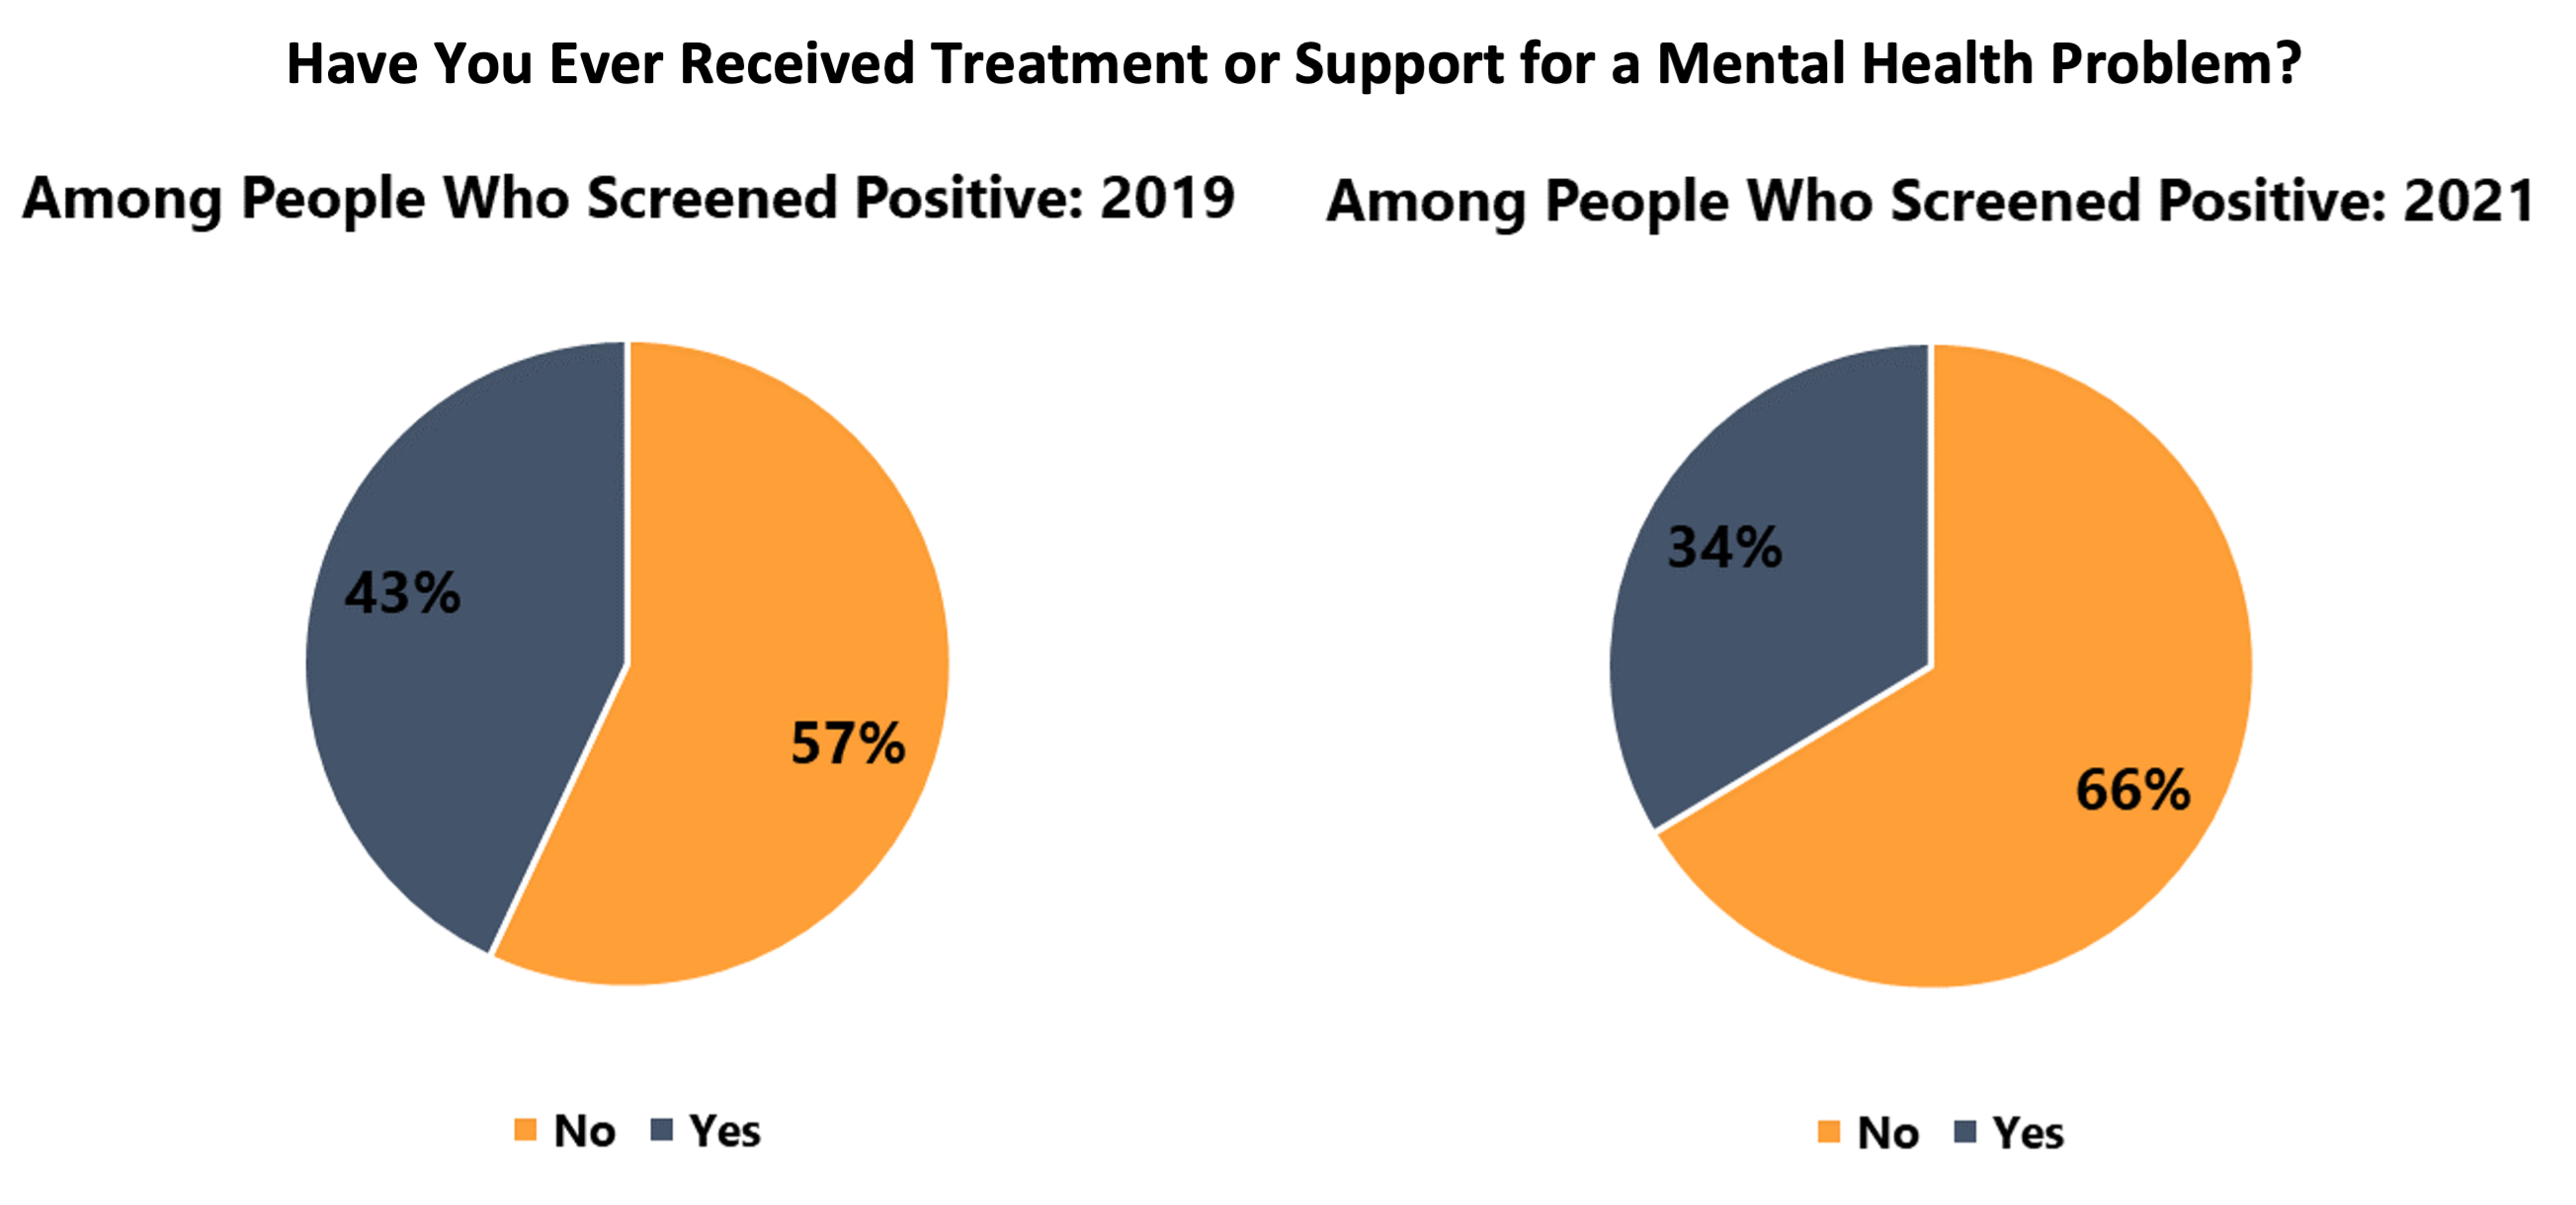 Have you ever received treatment or support for a mental health problem? with two pie charts, one from 2019 and one from 2021